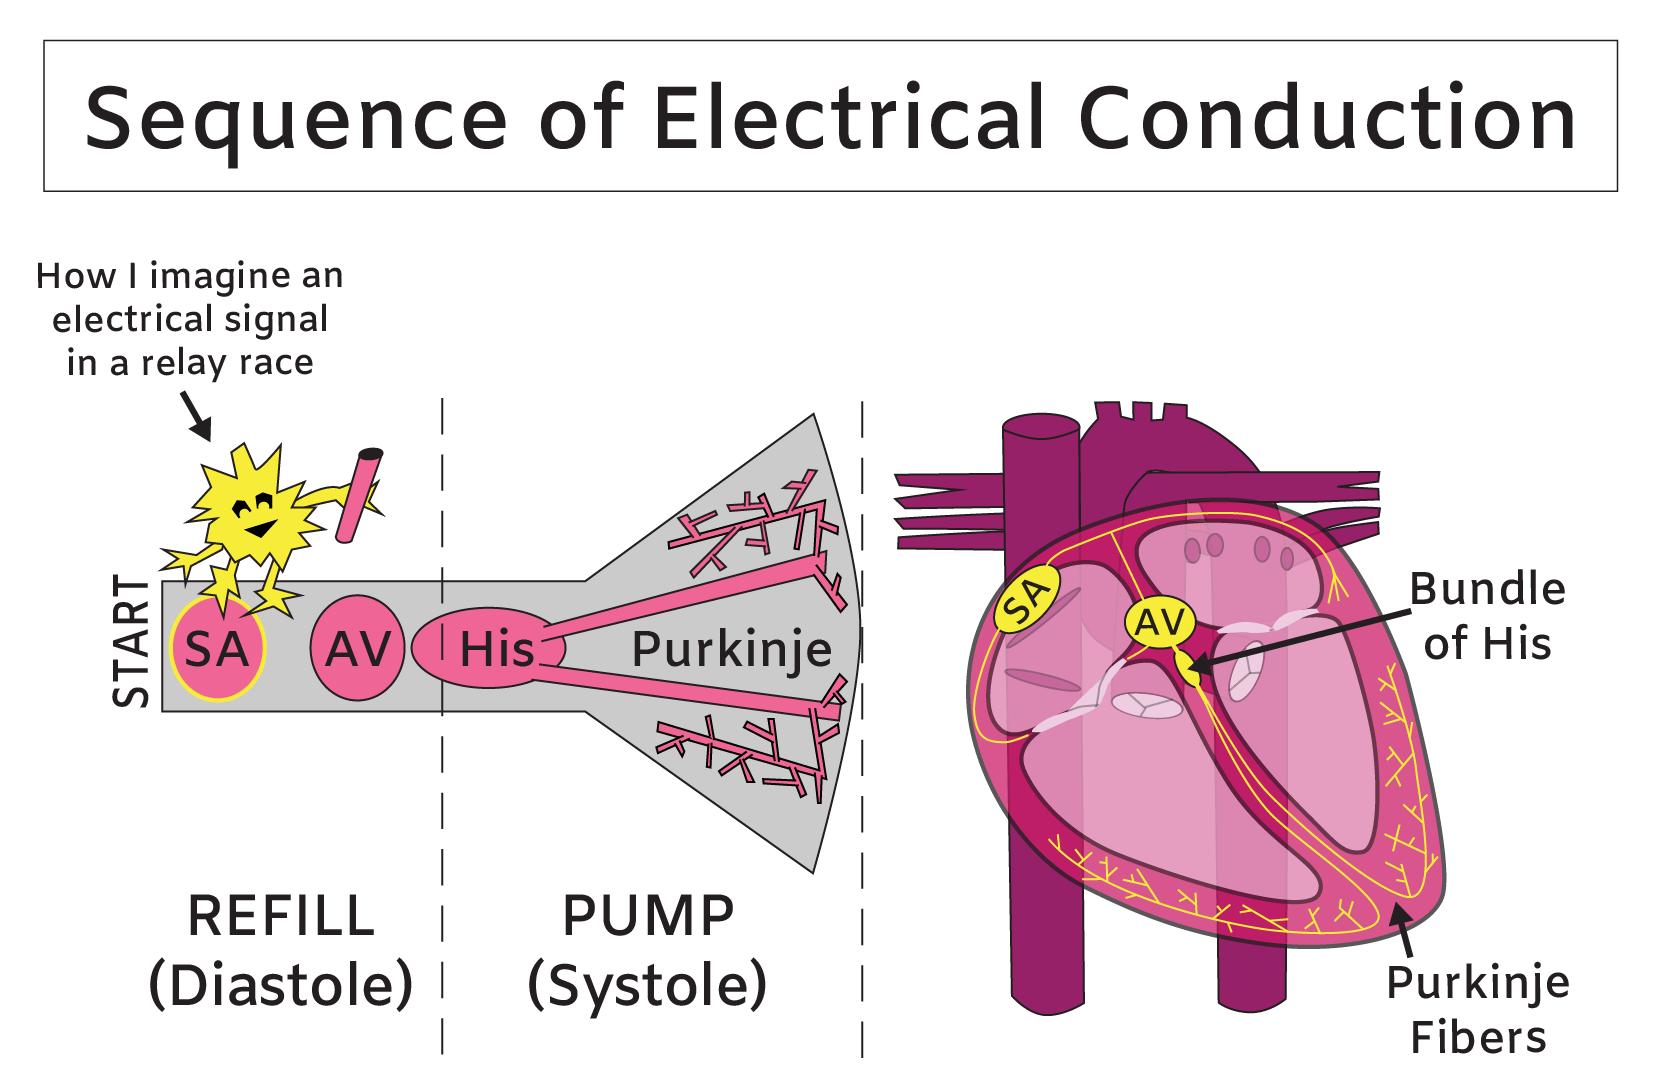 Electrical Conduction System Of The Heart The Figure - vrogue.co